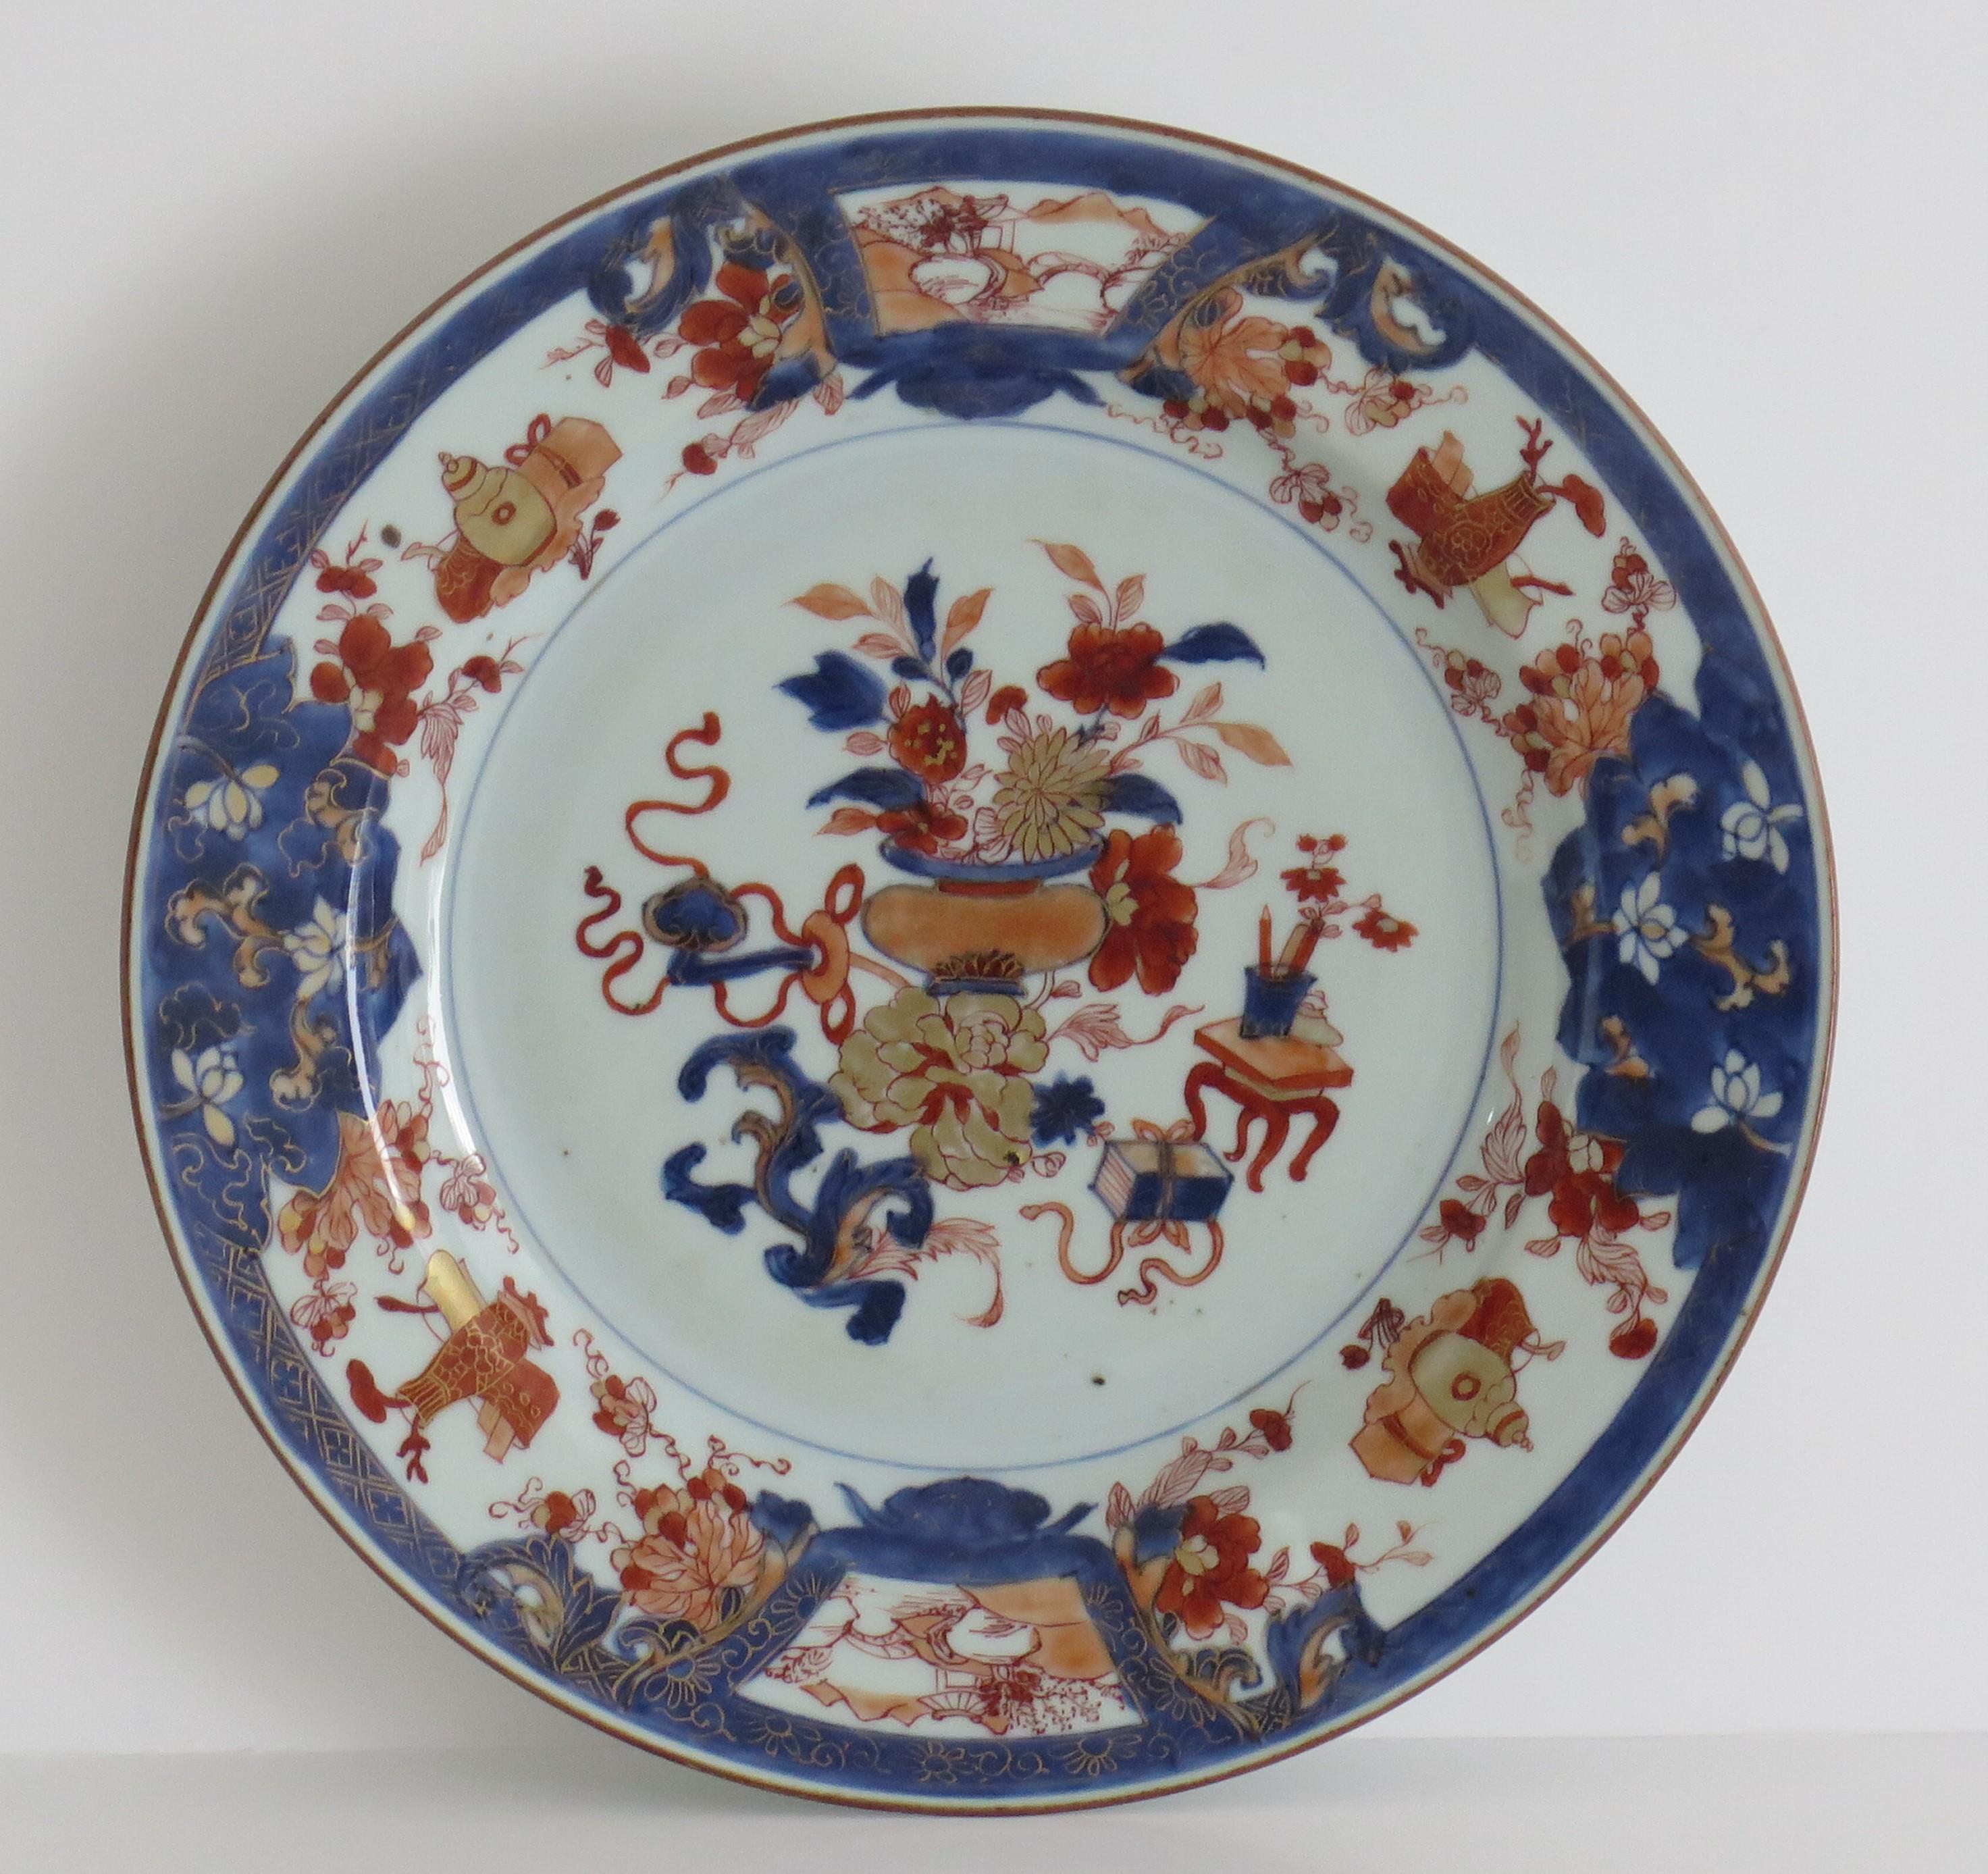 This is a beautifully hand painted Chinese Export porcelain Plate from the Qing, Kangxi period, (1662-1722), circa 1700. 

The plate is of large dinner plate size with a 10 inch diameter. It is finely potted with a carefully cut base rim and a